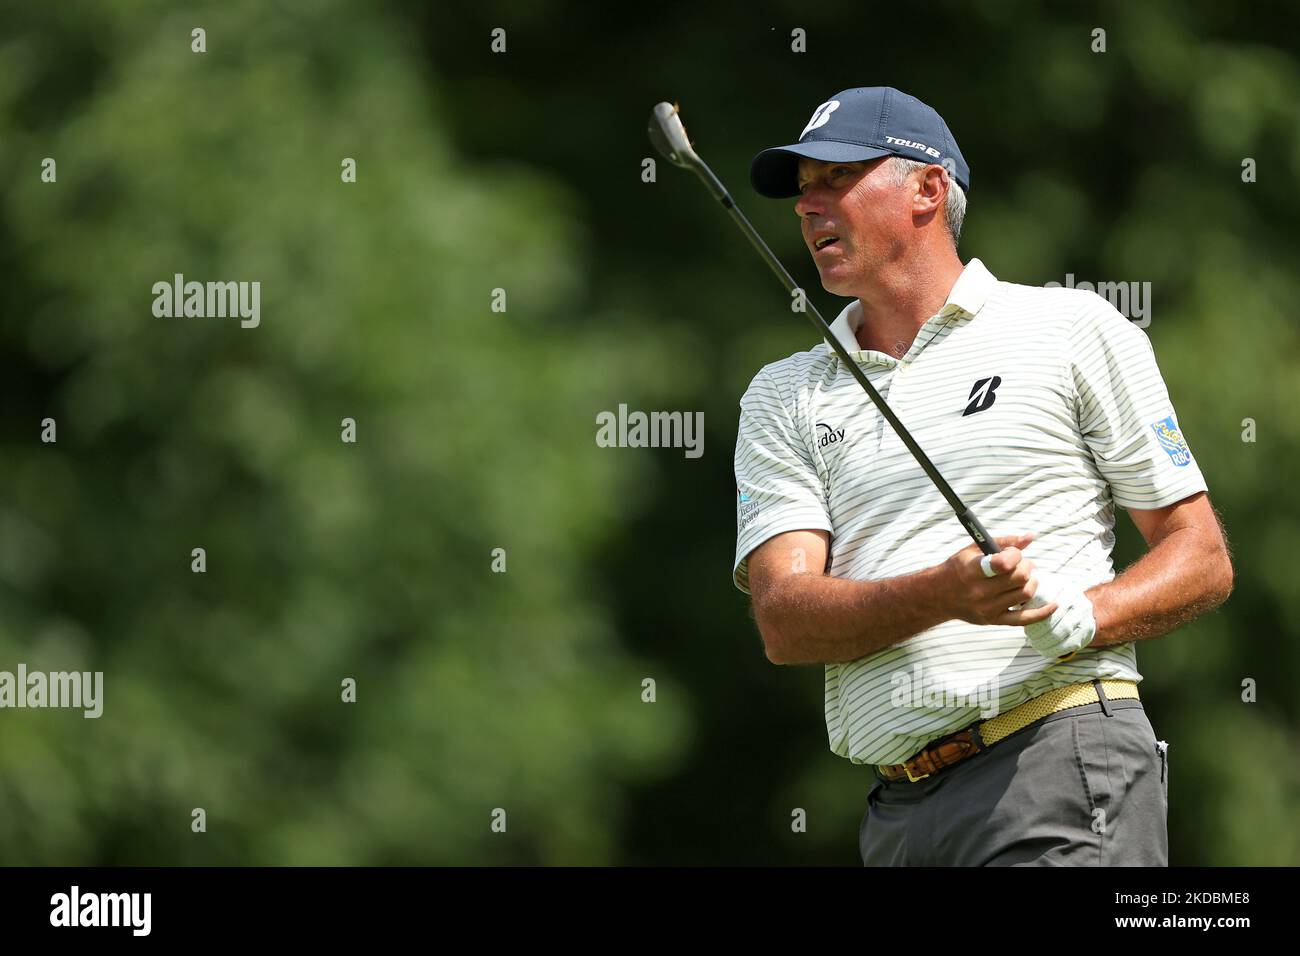 Matt Kuchar of the USA follows his fairway shot on the 8th hole during the final round of The Memorial Tournament presented by Workday at Muirfield Village Golf Club in Dublin, Ohio, USA on Sunday, June 5, 2022. (Photo by Jorge Lemus/NurPhoto) Stock Photo